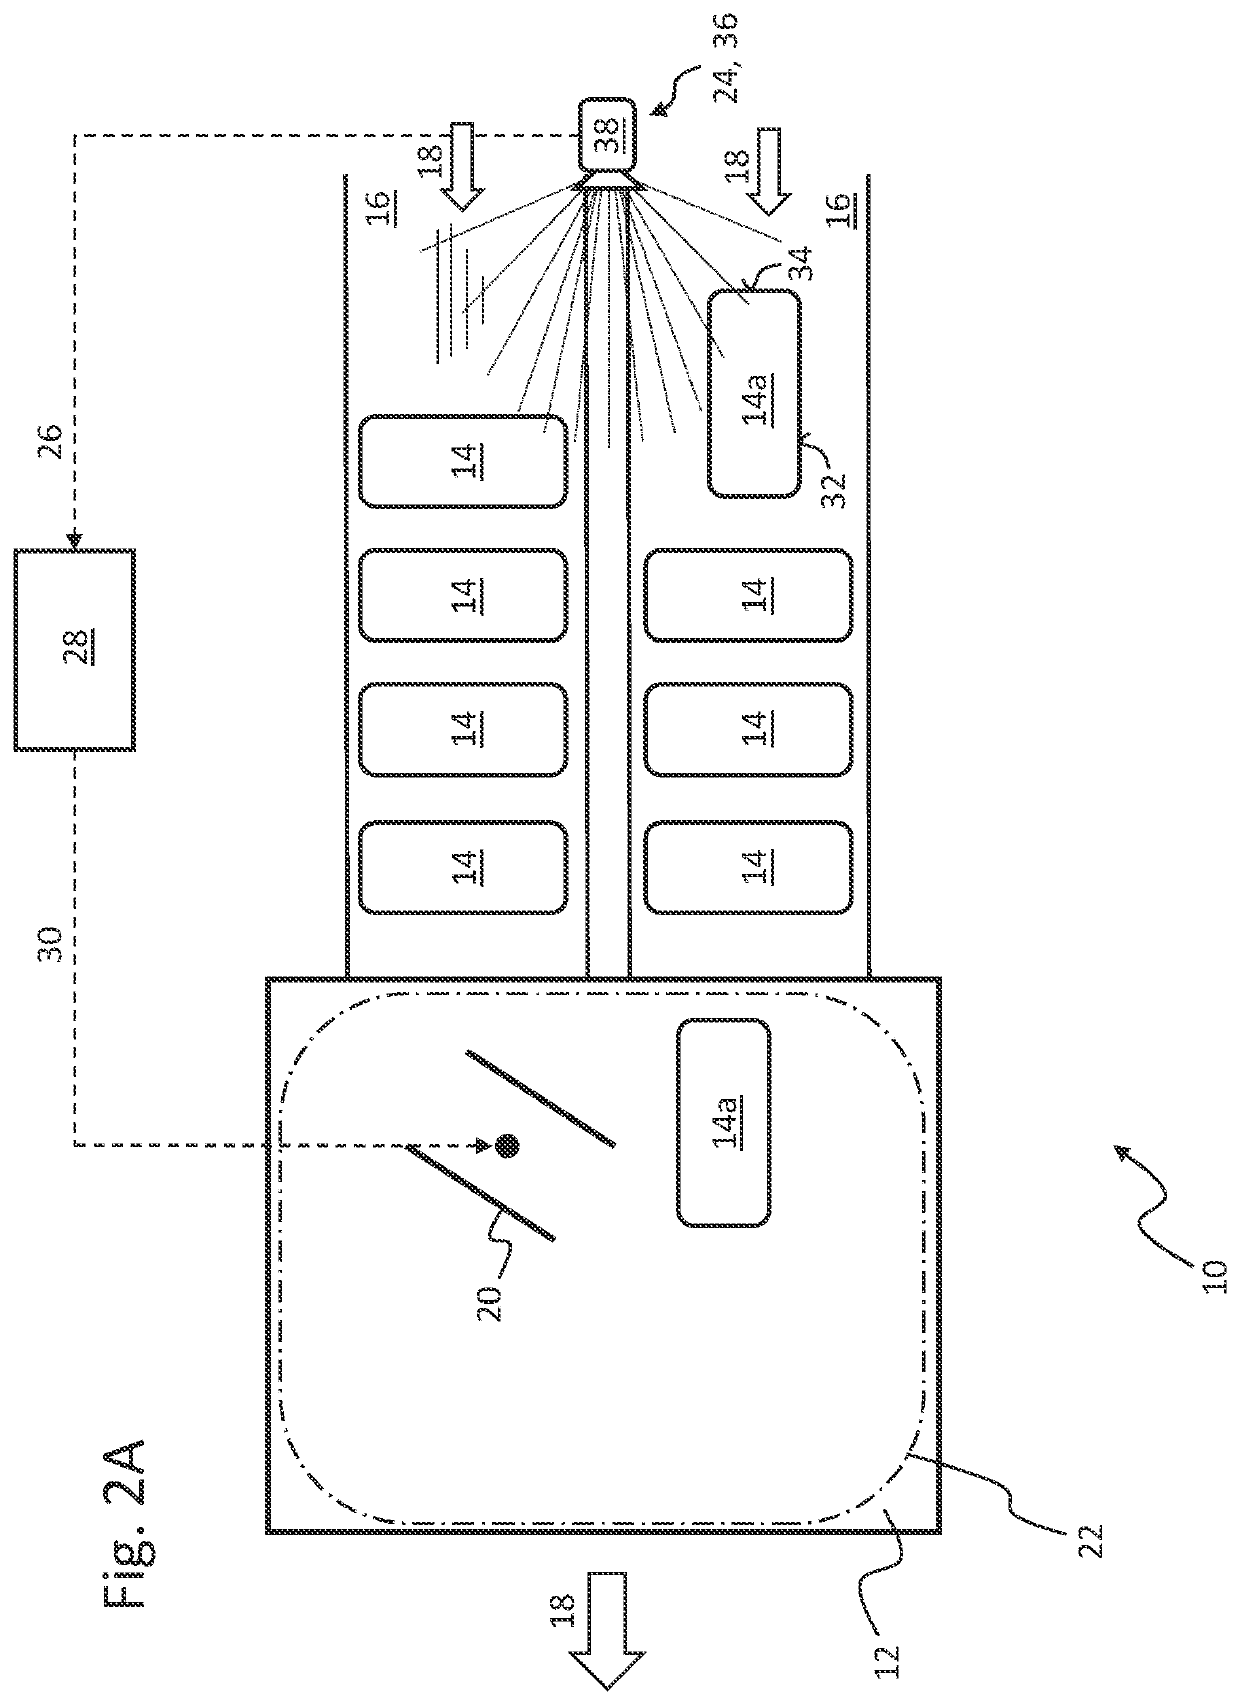 Device and method for the treatment and/or handling of piece goods moved in at least one row